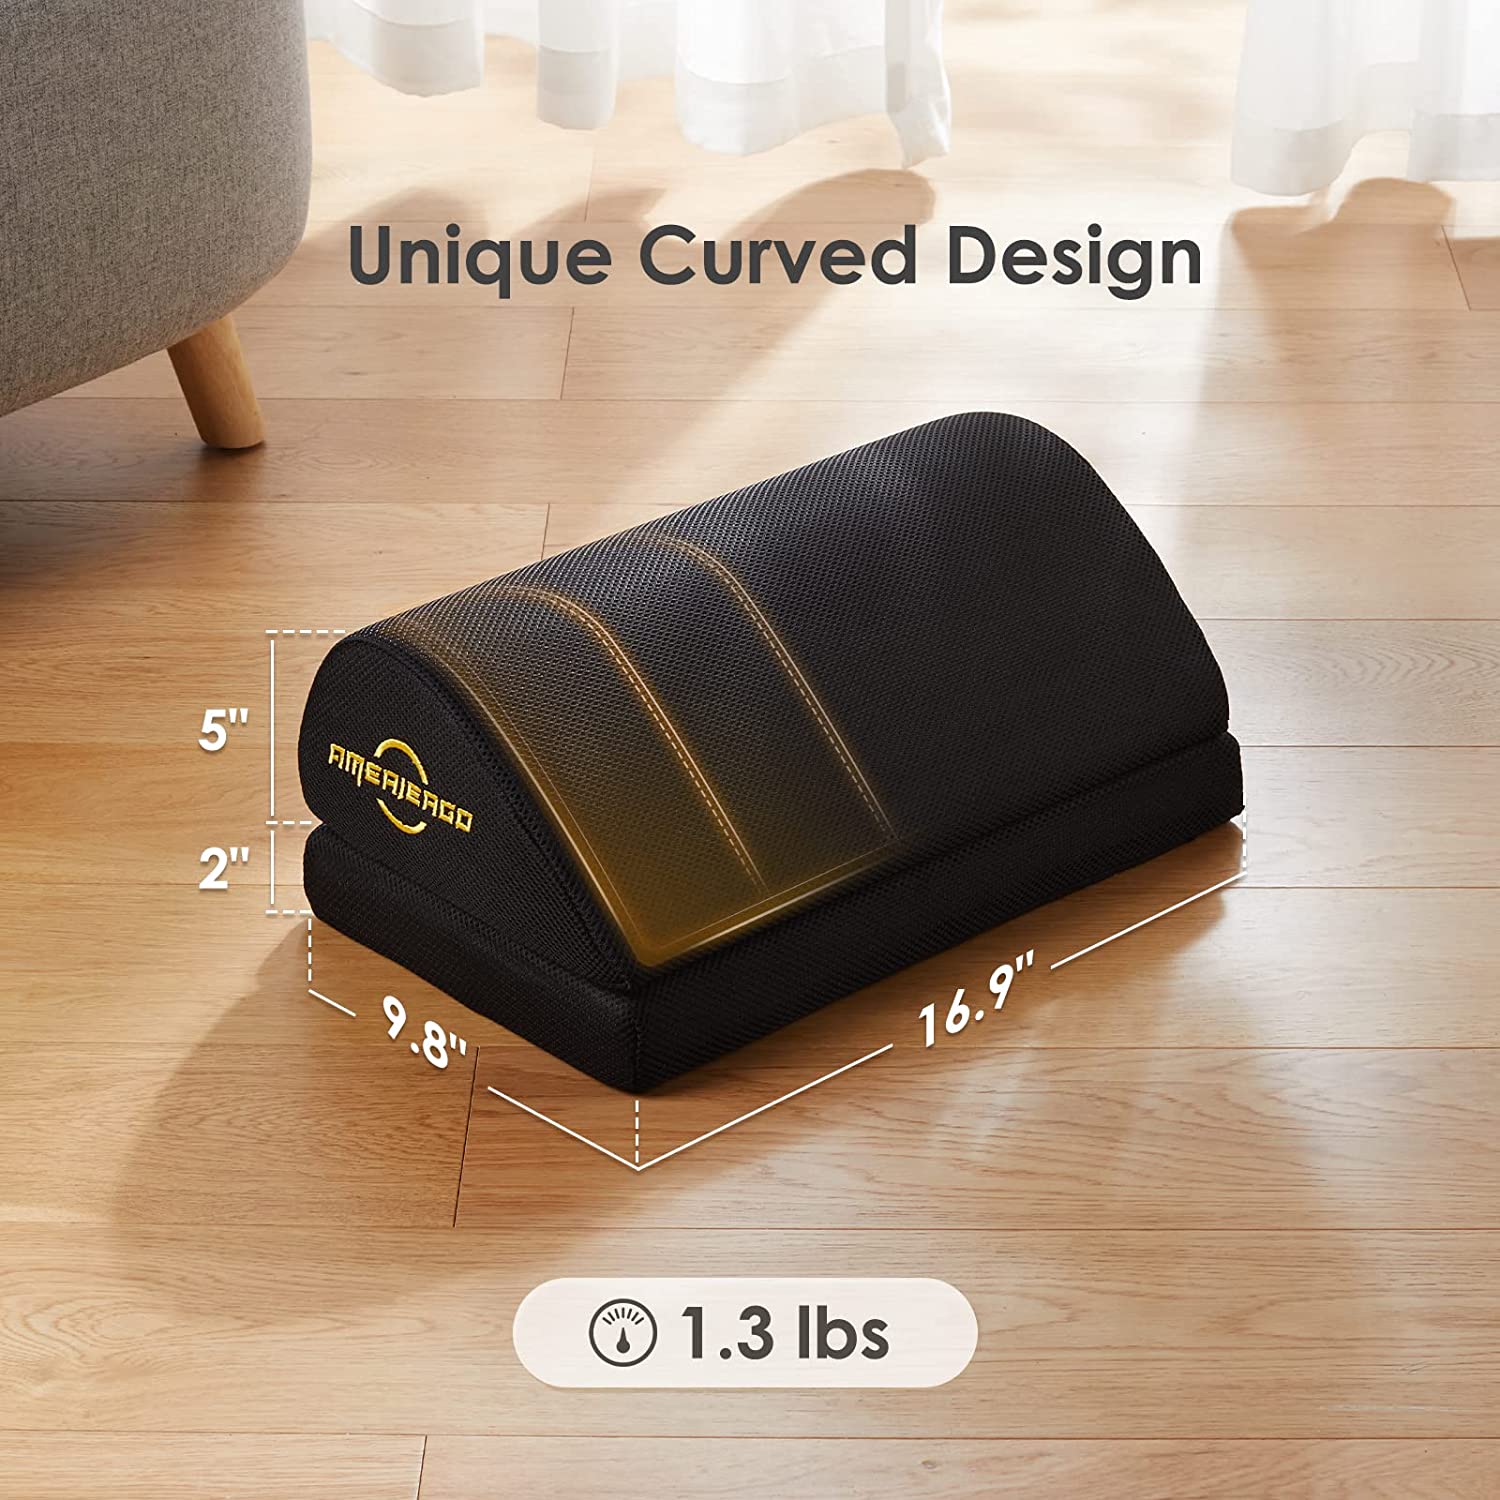 Size measurements for an adjustable foot rest. The text says, 'Unique curved design.'